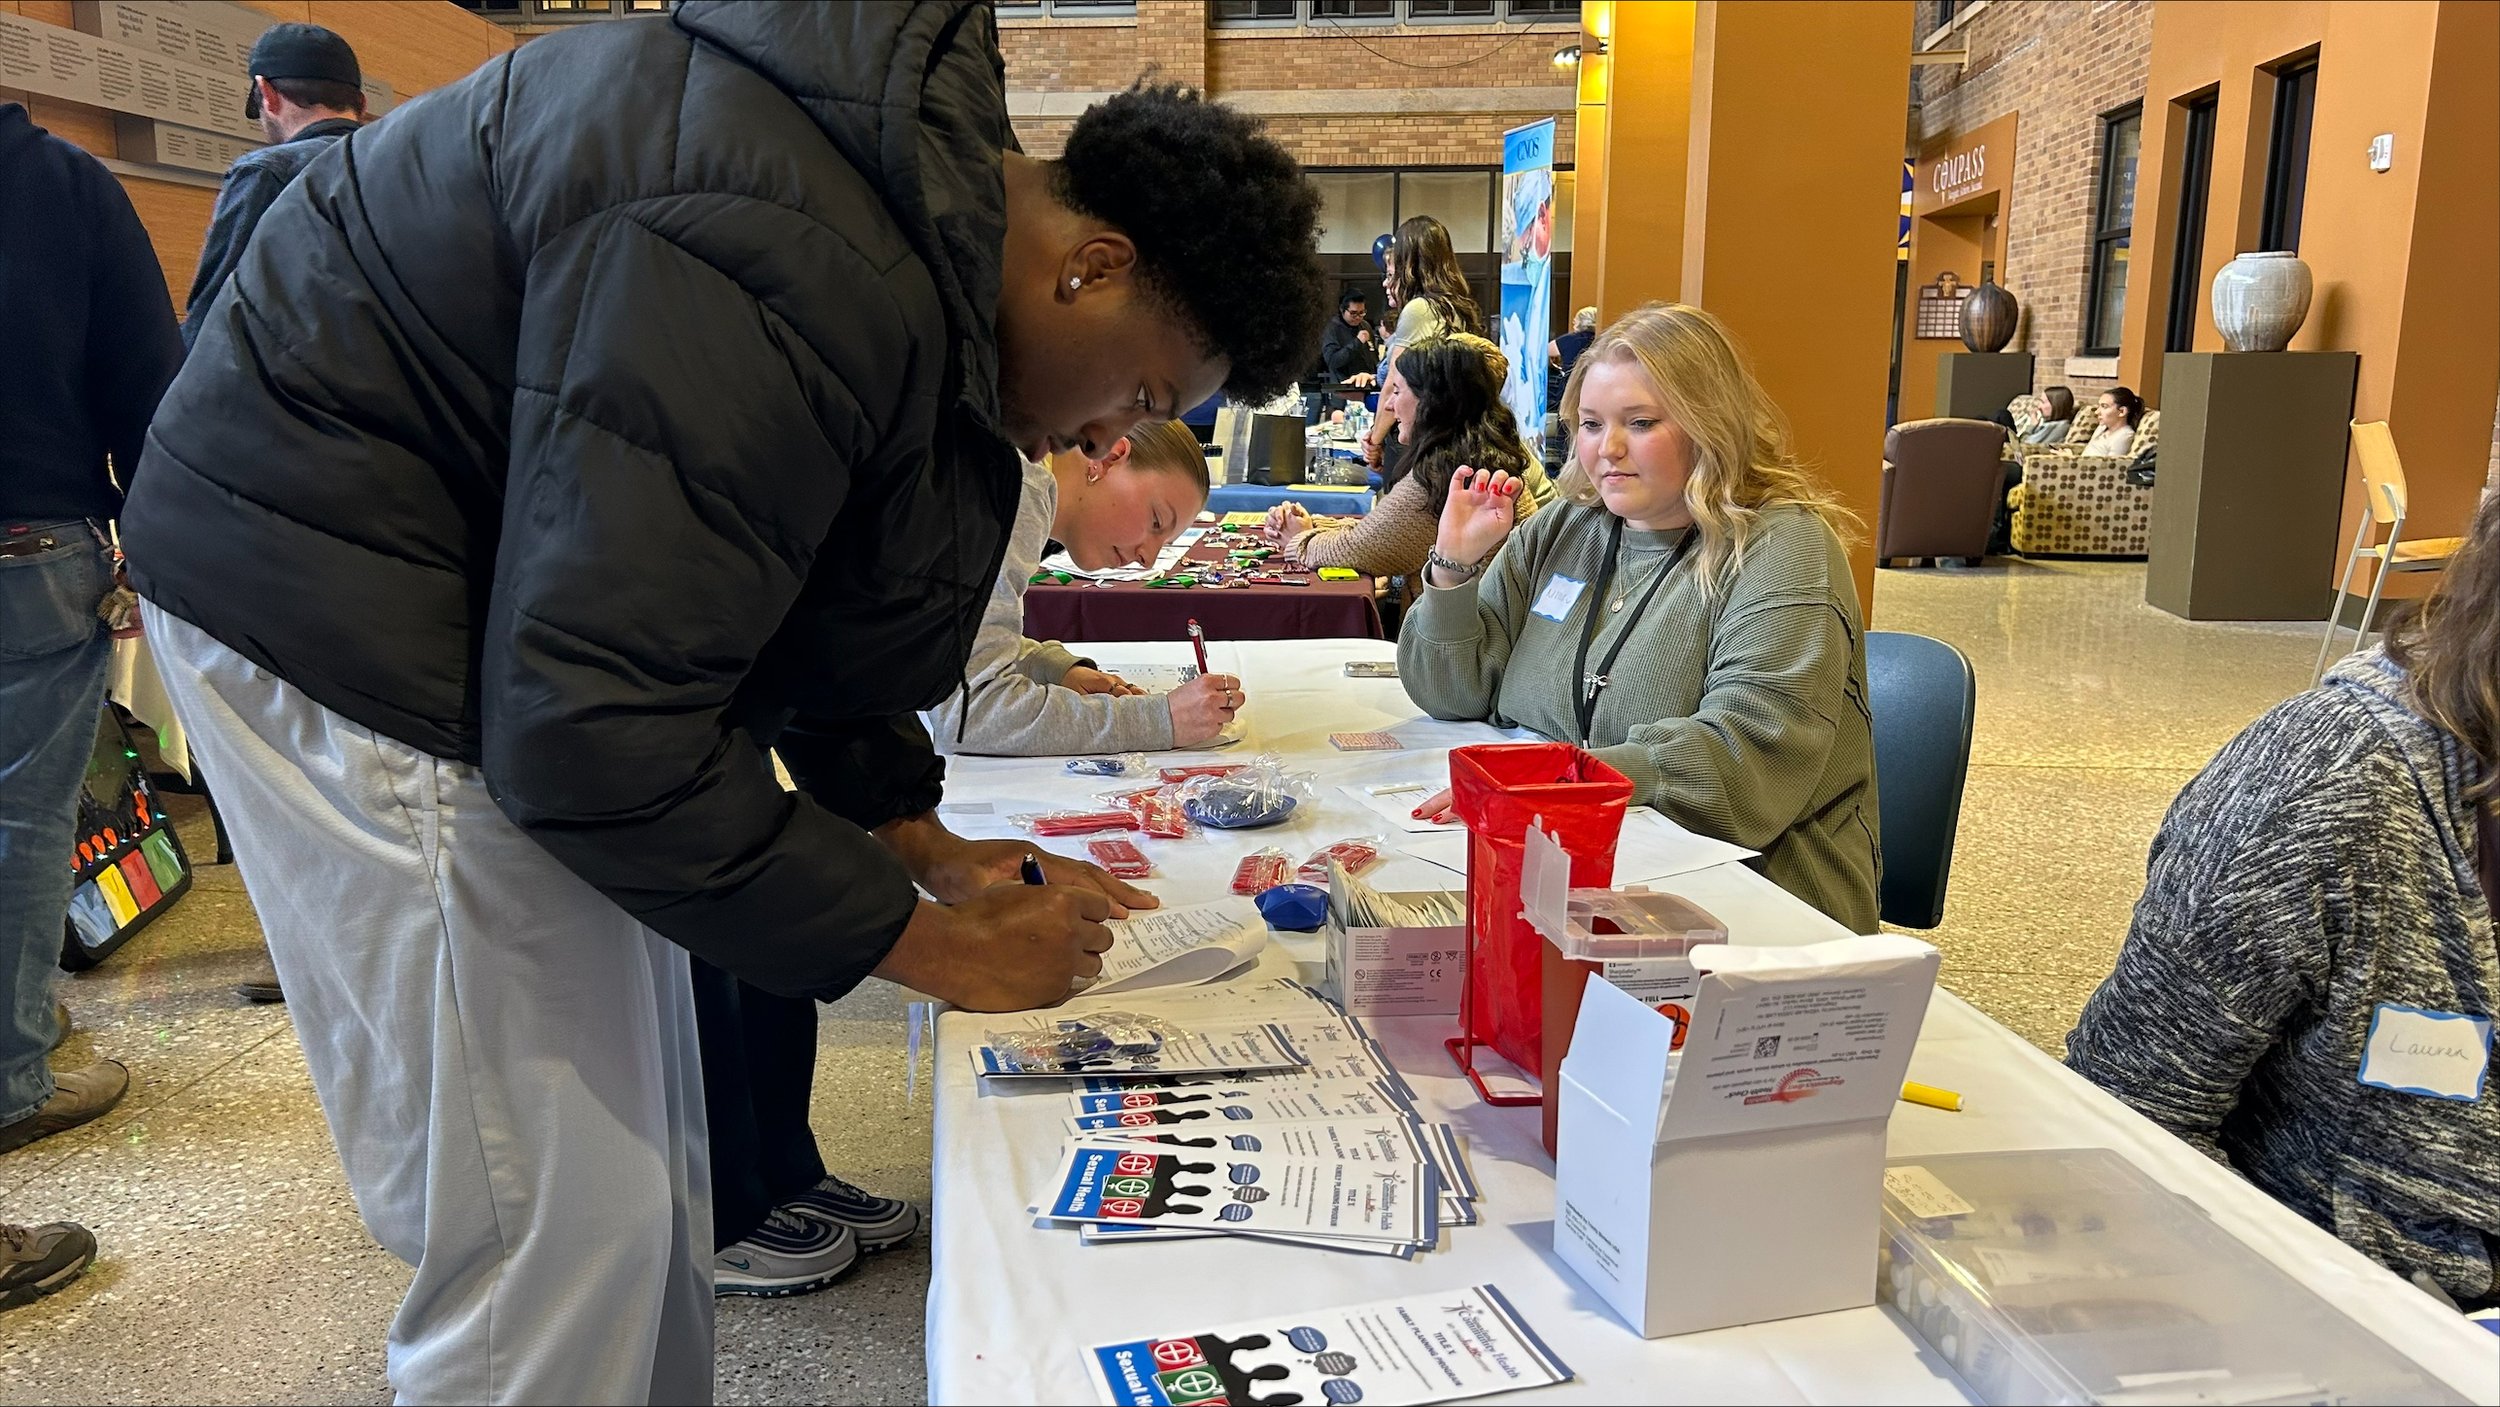  Aaron Okoro, and BCU student, signing up at the Siouxland Community Health Center booth. With the equipment they brought, participants were tested for syphilis and HIV on the spot and got their results within minutes.&nbsp; 